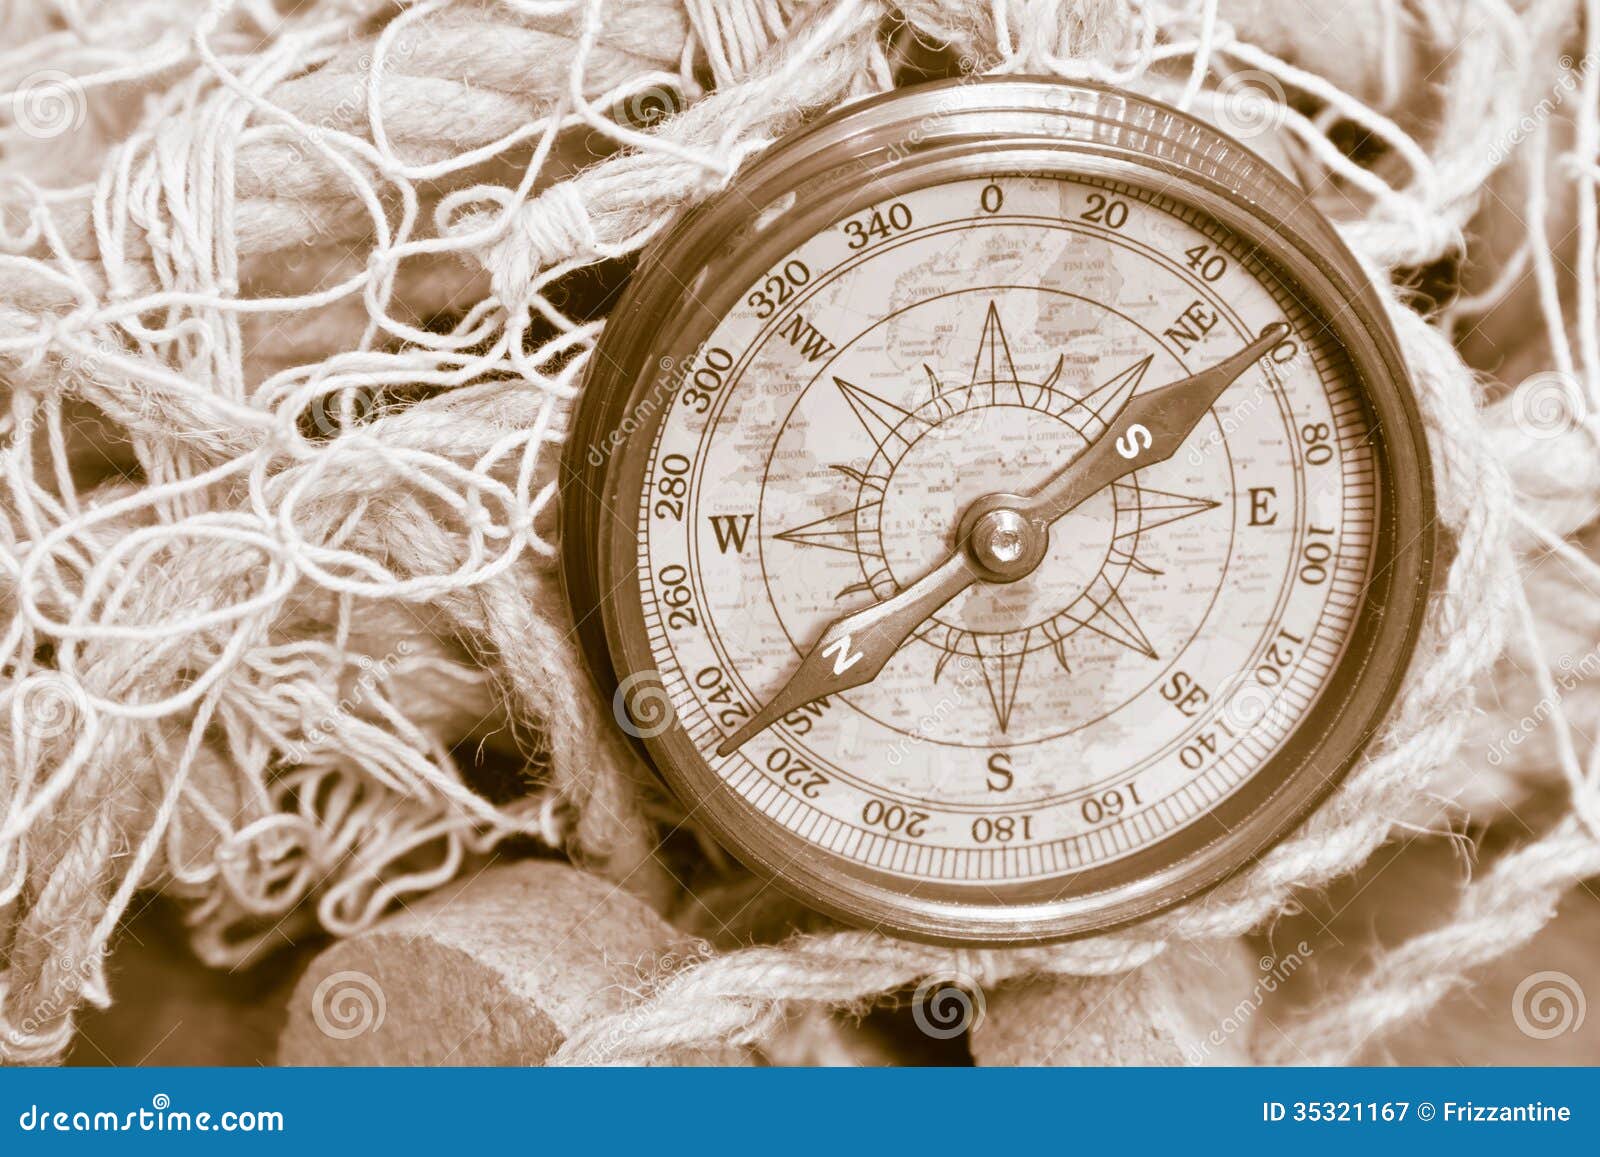 Old Compass Royalty Free Stock Photography - Image: 35321167